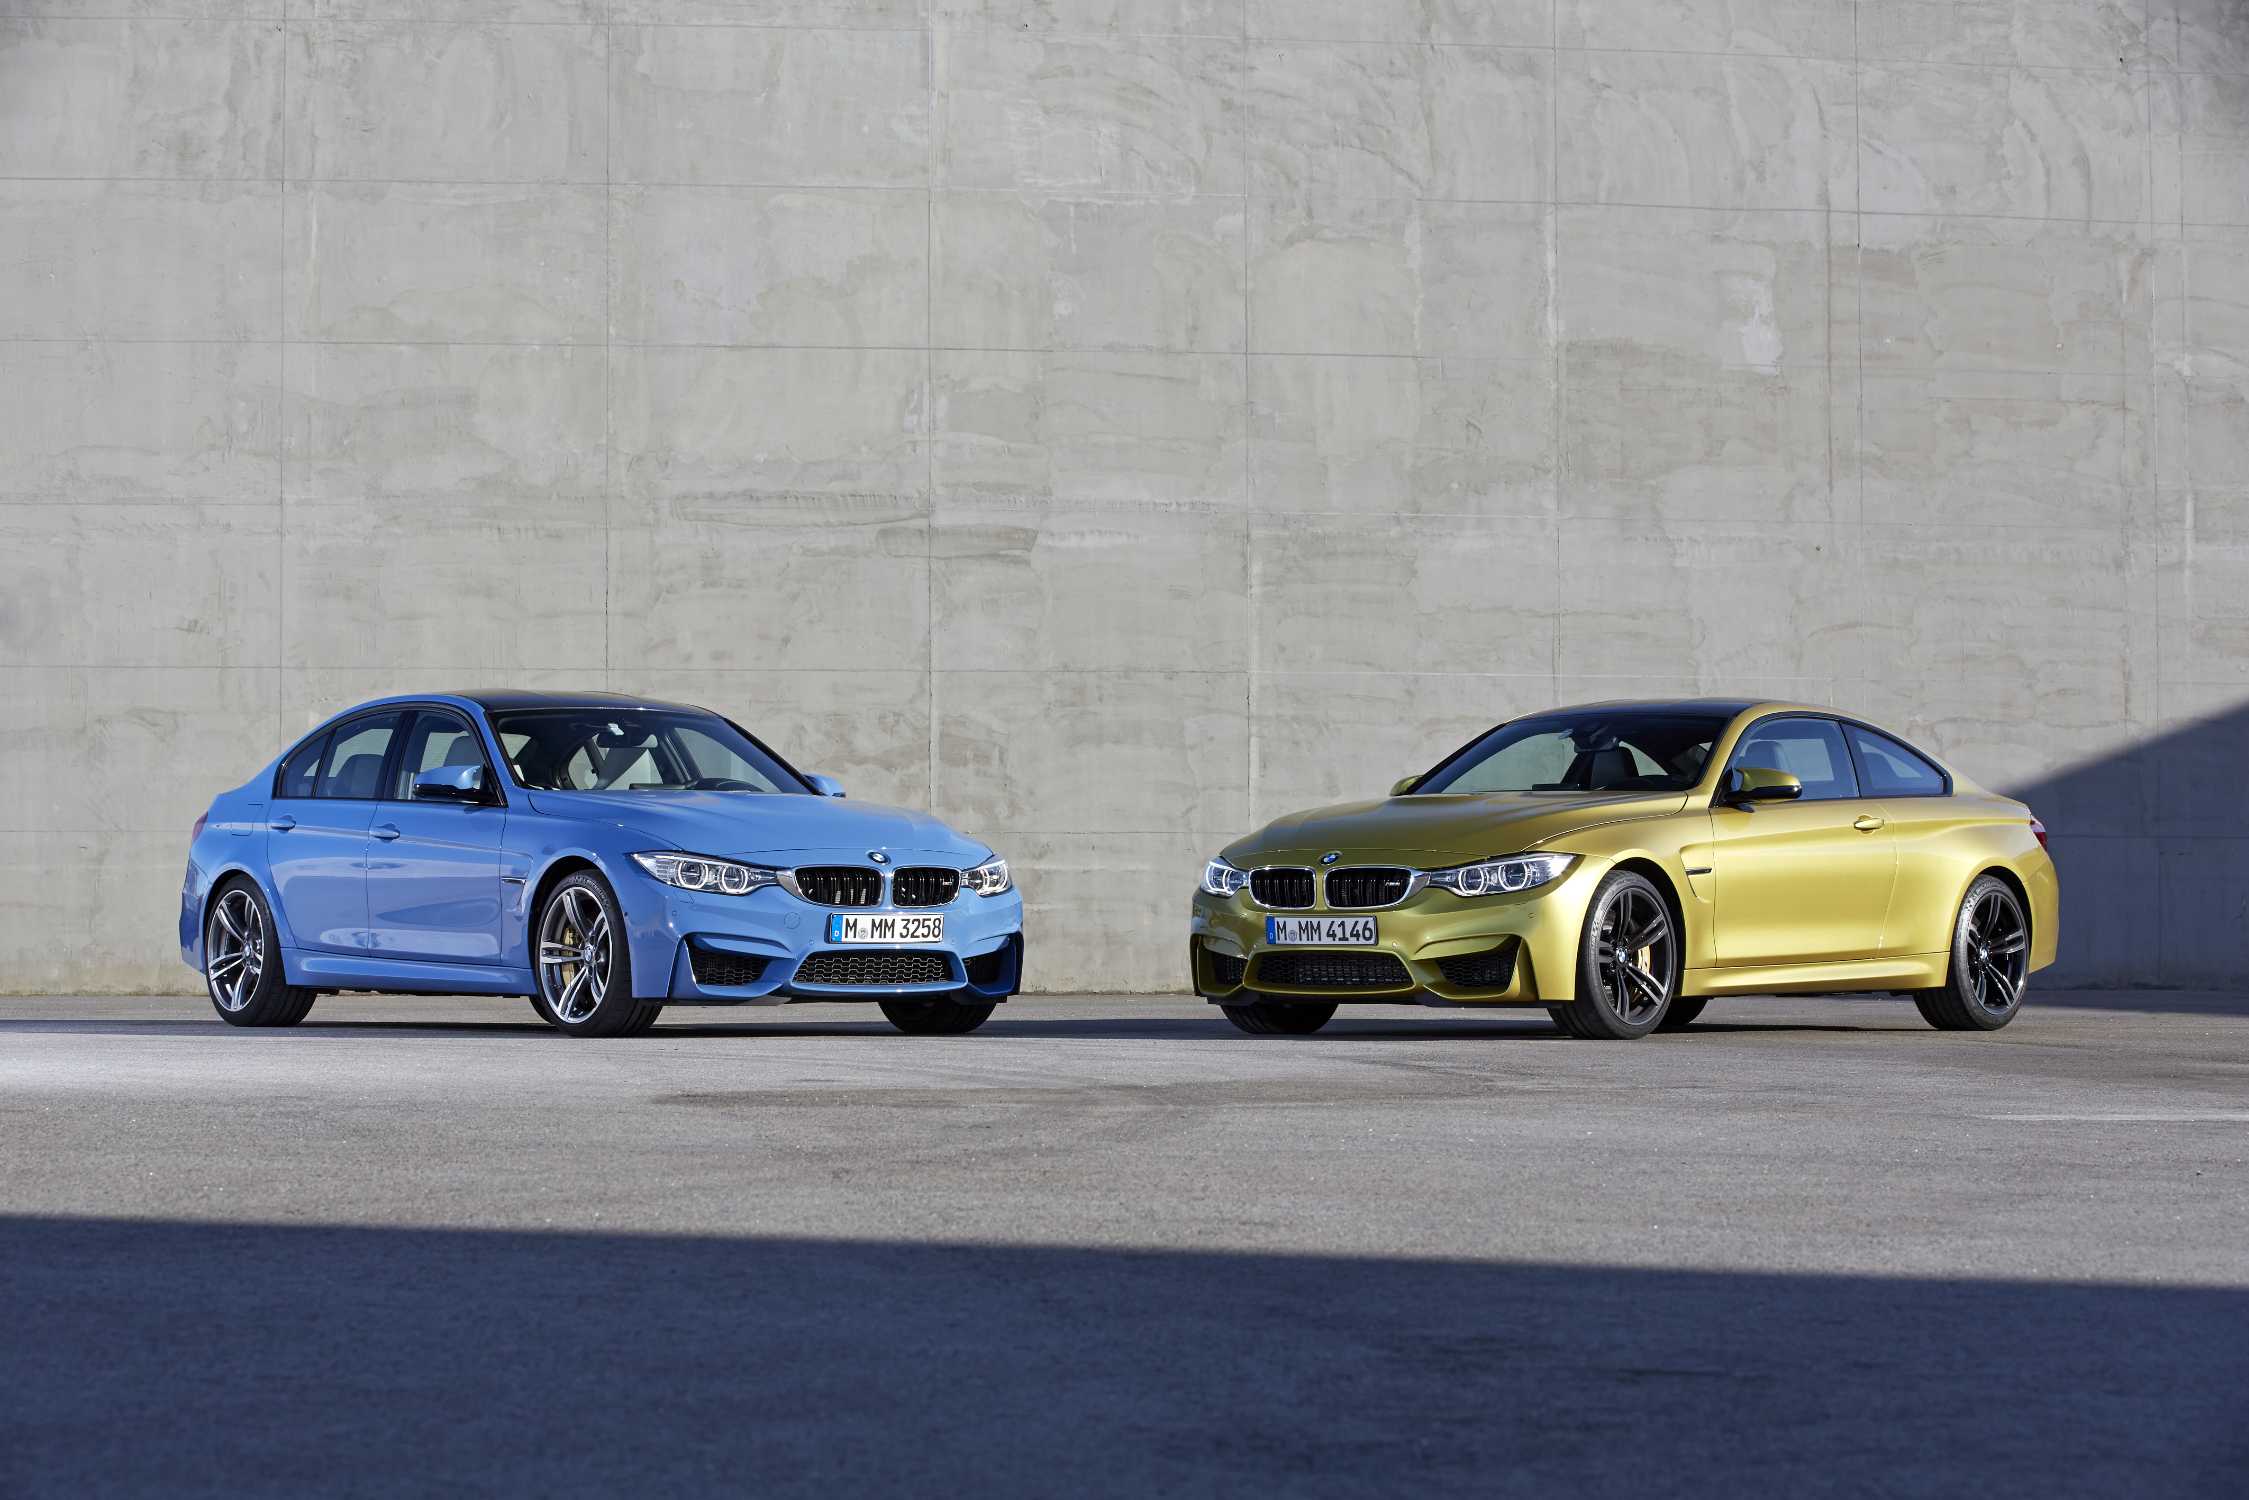 The New Bmw M3 Sedan And New Bmw M4 Coupe